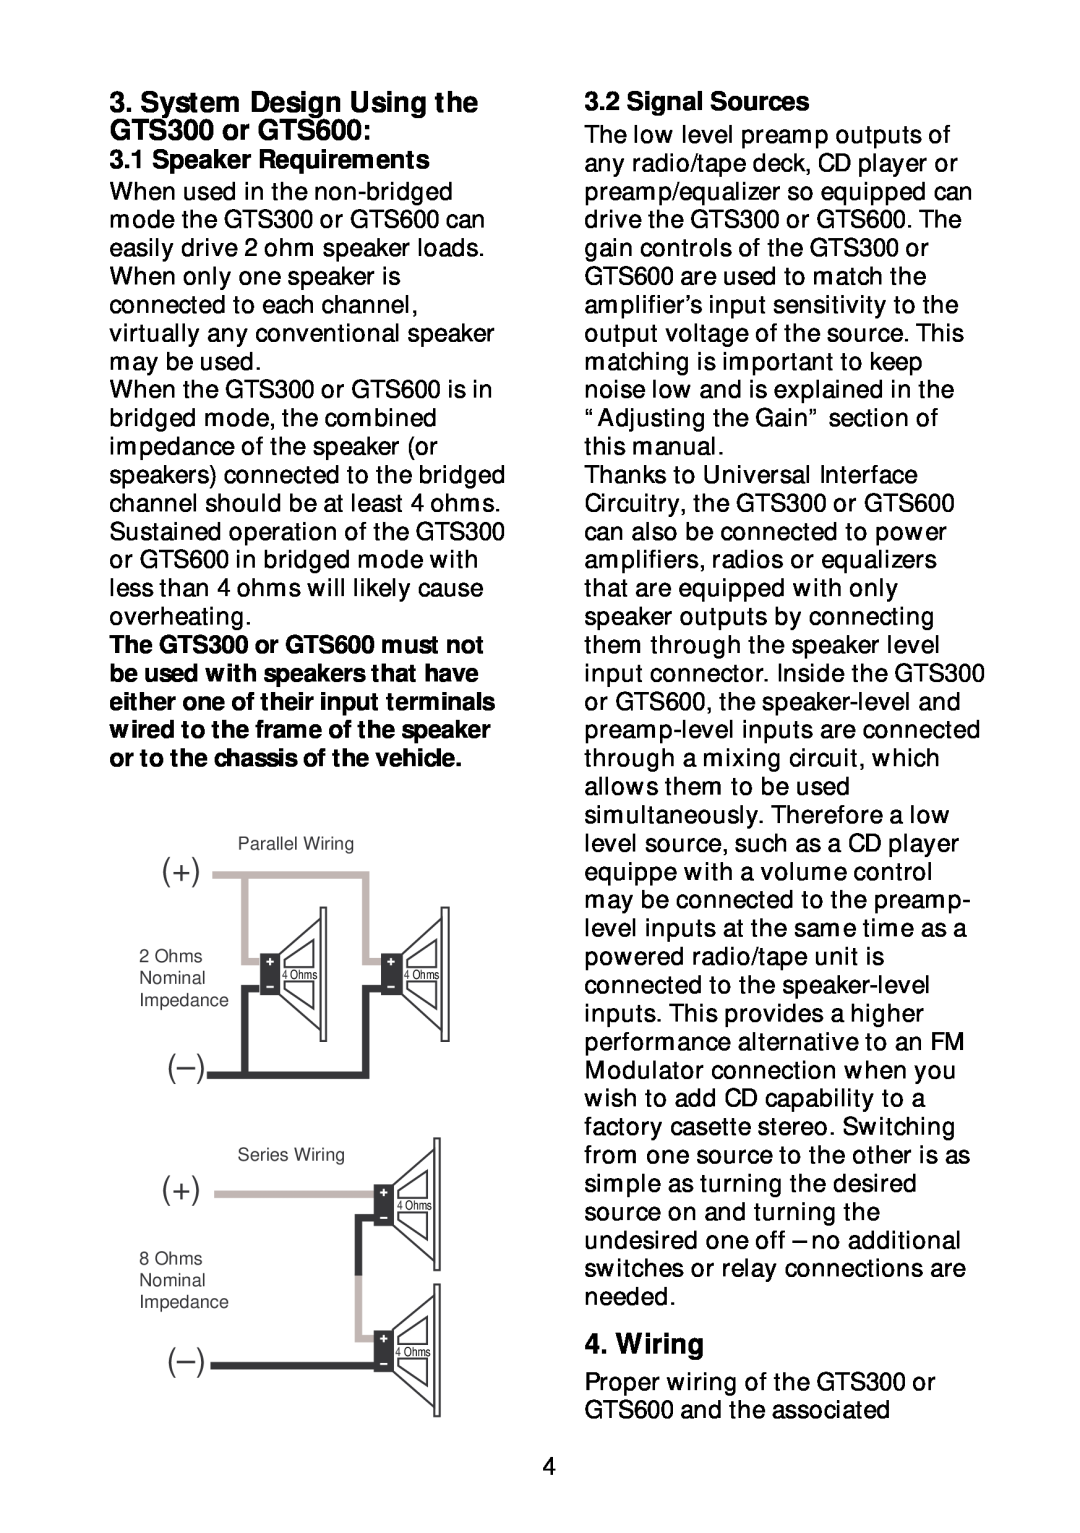 JBL manual System Design Using the GTS300 or GTS600, Wiring, Speaker Requirements, Signal Sources 